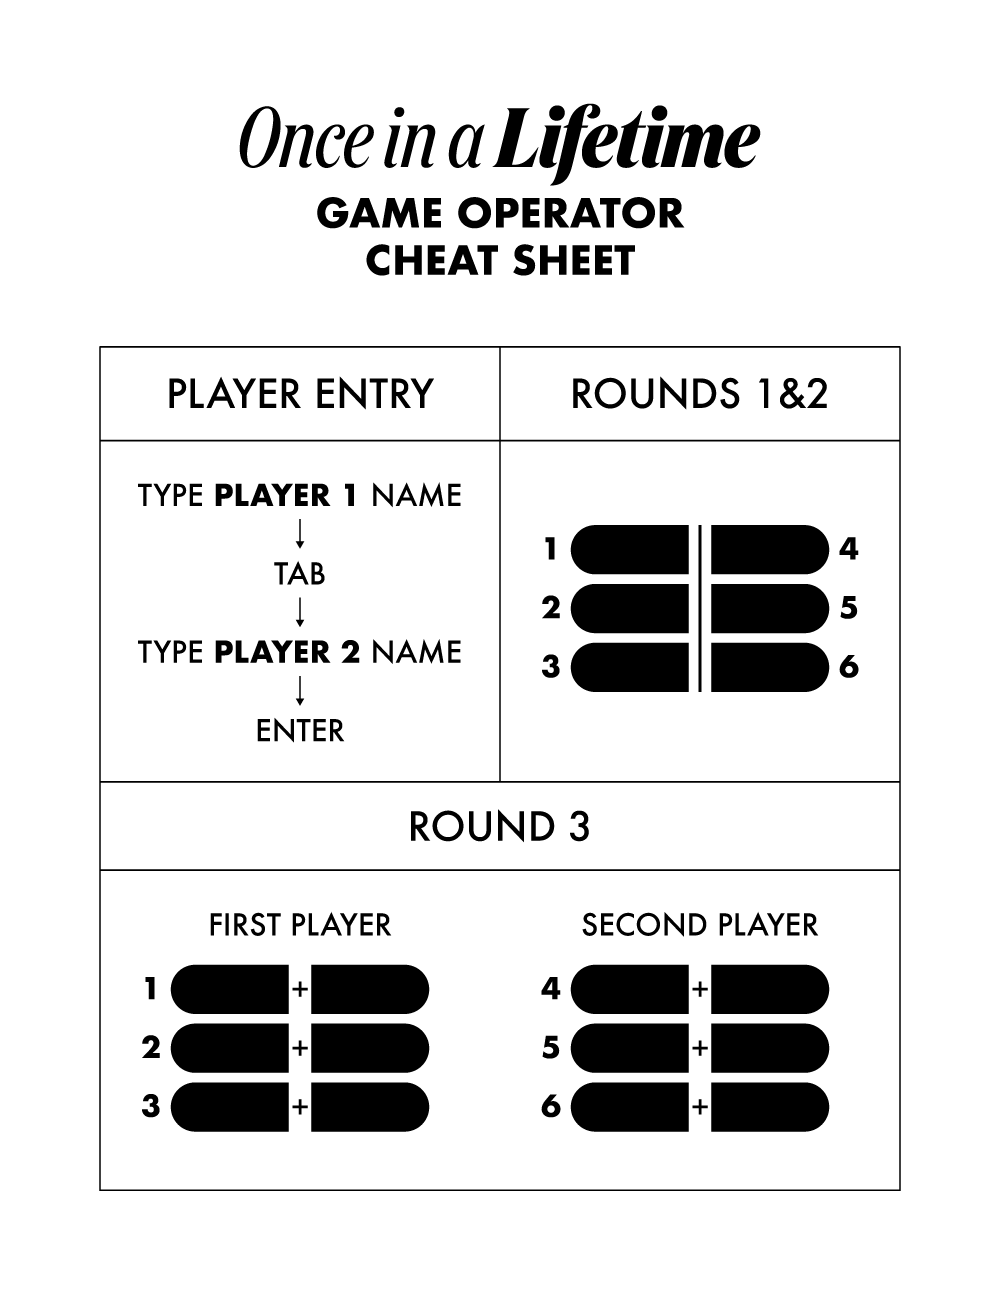 A cheat sheet for the Once in a Lifetime game operator, showing which keys correspond with which options